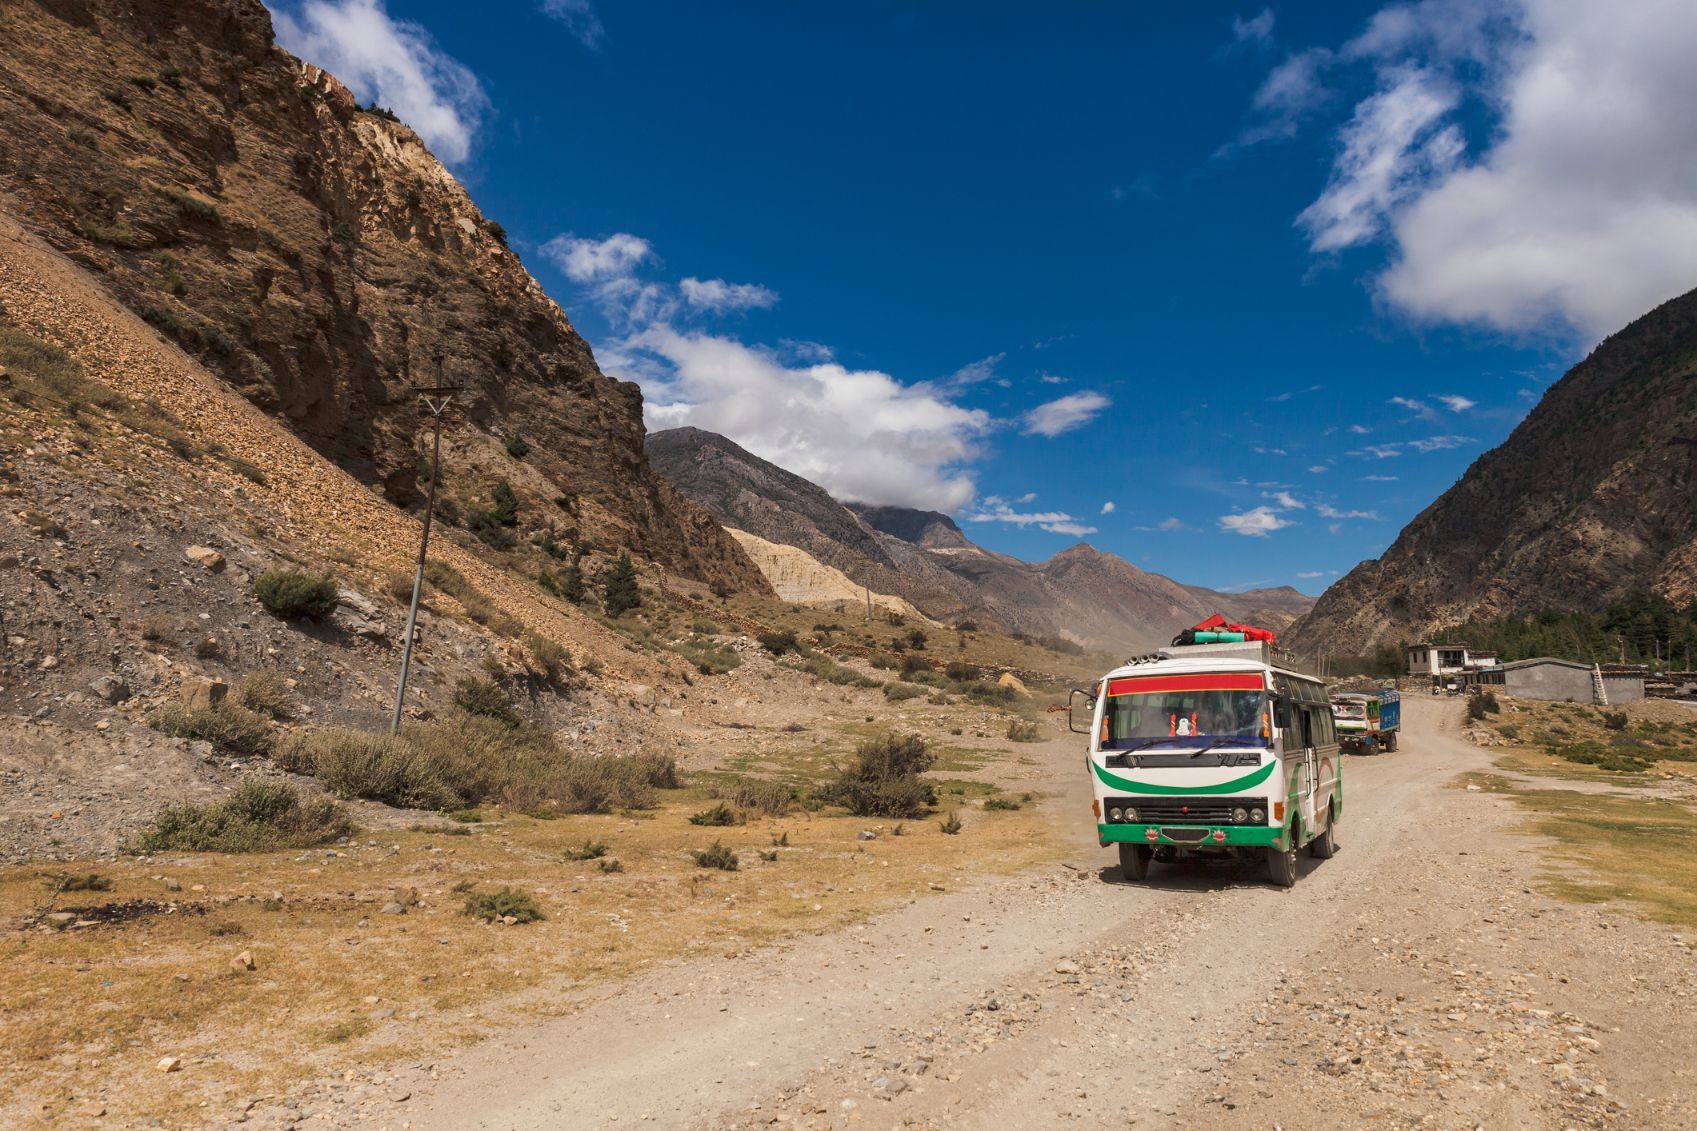 A tourist bus riding on the bumpy roads of the Annapurna region in Nepal